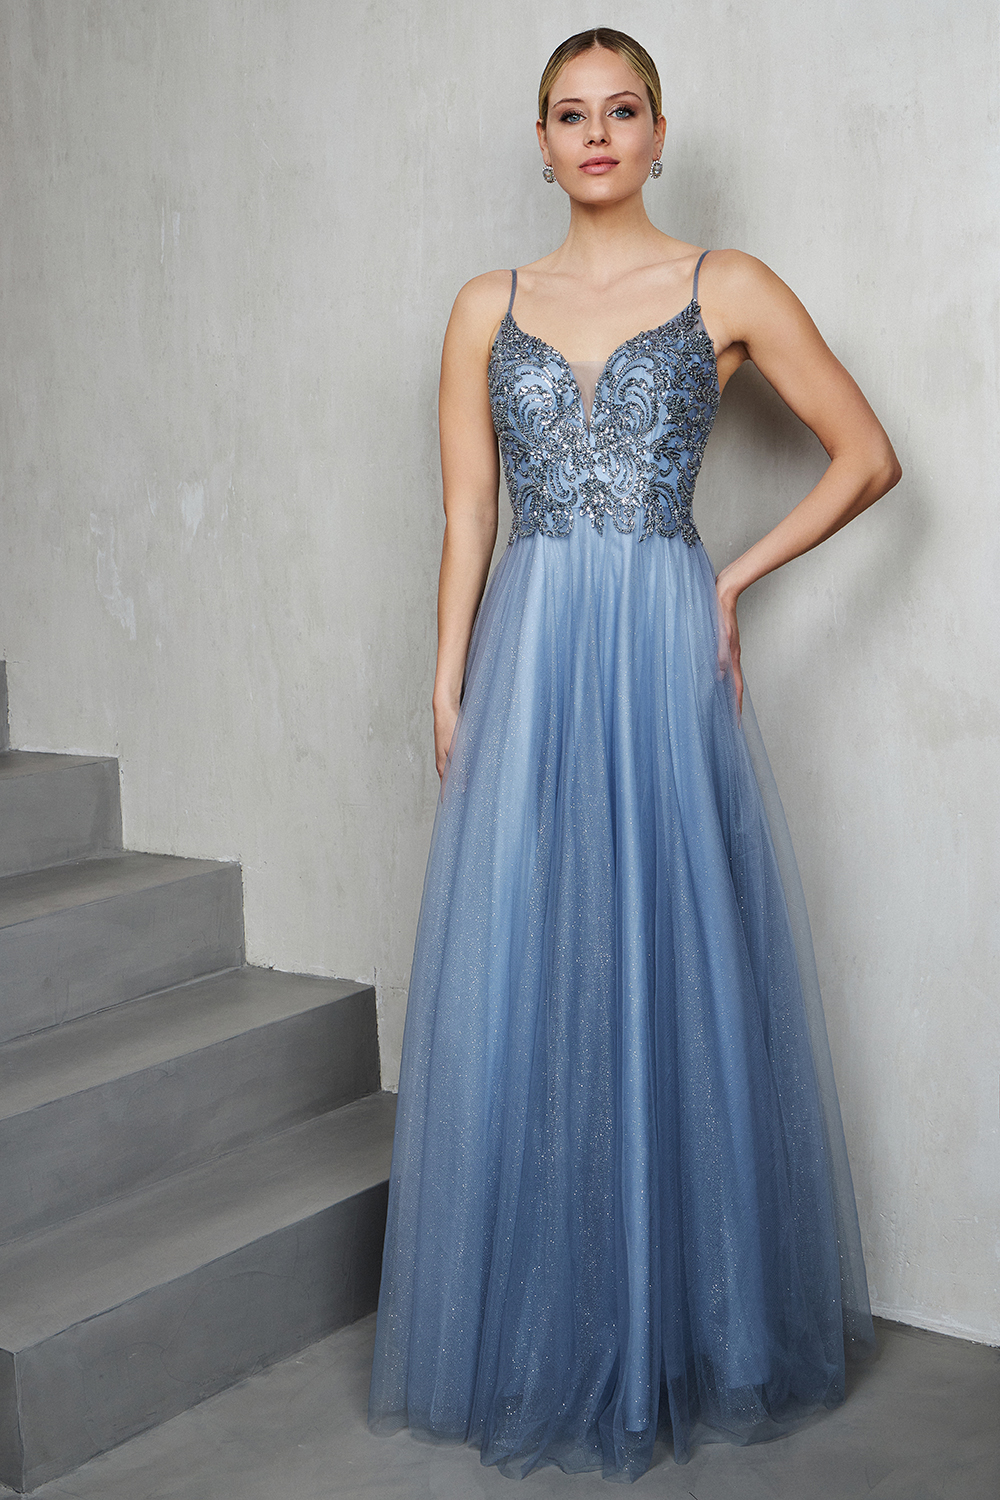 Вечерние платья / Long evening dress with shining tulle fabric and fully beaded top